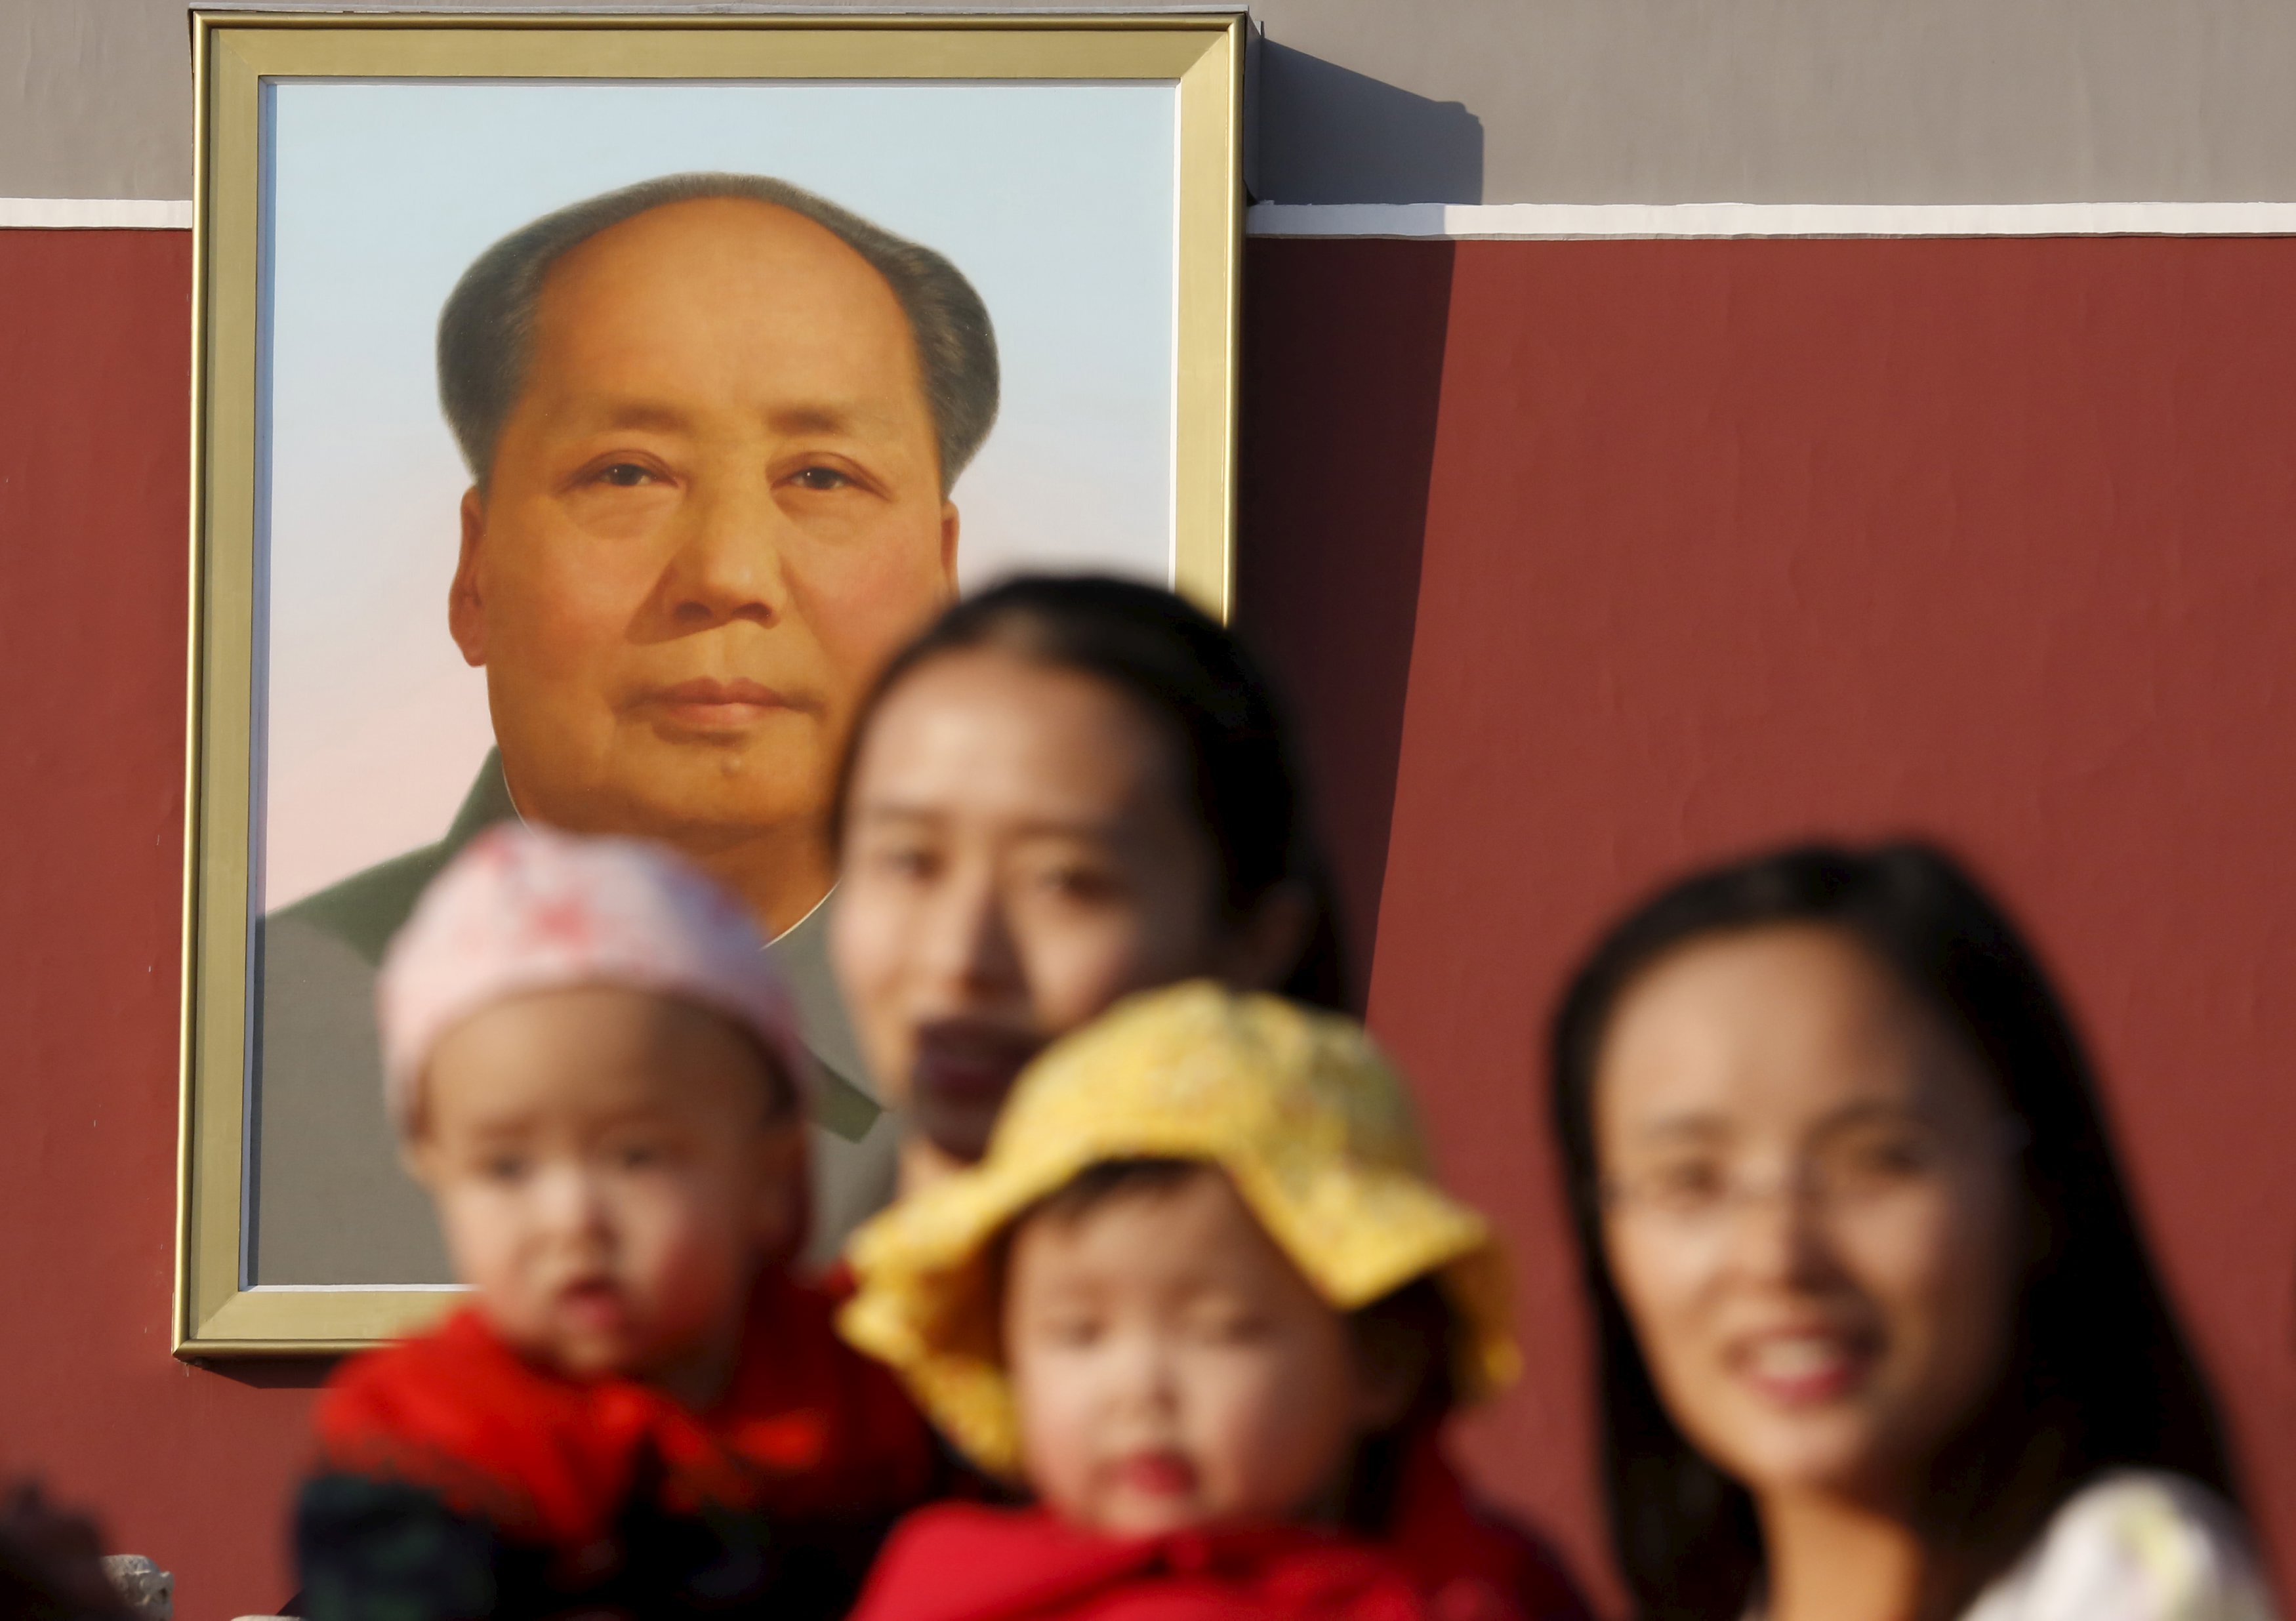 Two women and their babies pose for photographs in front of the giant portrait of late Chinese chairman Mao Zedong on the Tiananmen Gate in Beijing November 2, 2015. China must continue to enforce its one-child policy until new rules allowing all couples to have two children go into effect, the top family planning body said. The ruling Communist Party said last week that Beijing would loosen its decades-old one-child policy. The plan for the change must be approved by the rubber-stamp parliament during its annual session in March. REUTERS/Kim Kyung-Hoon